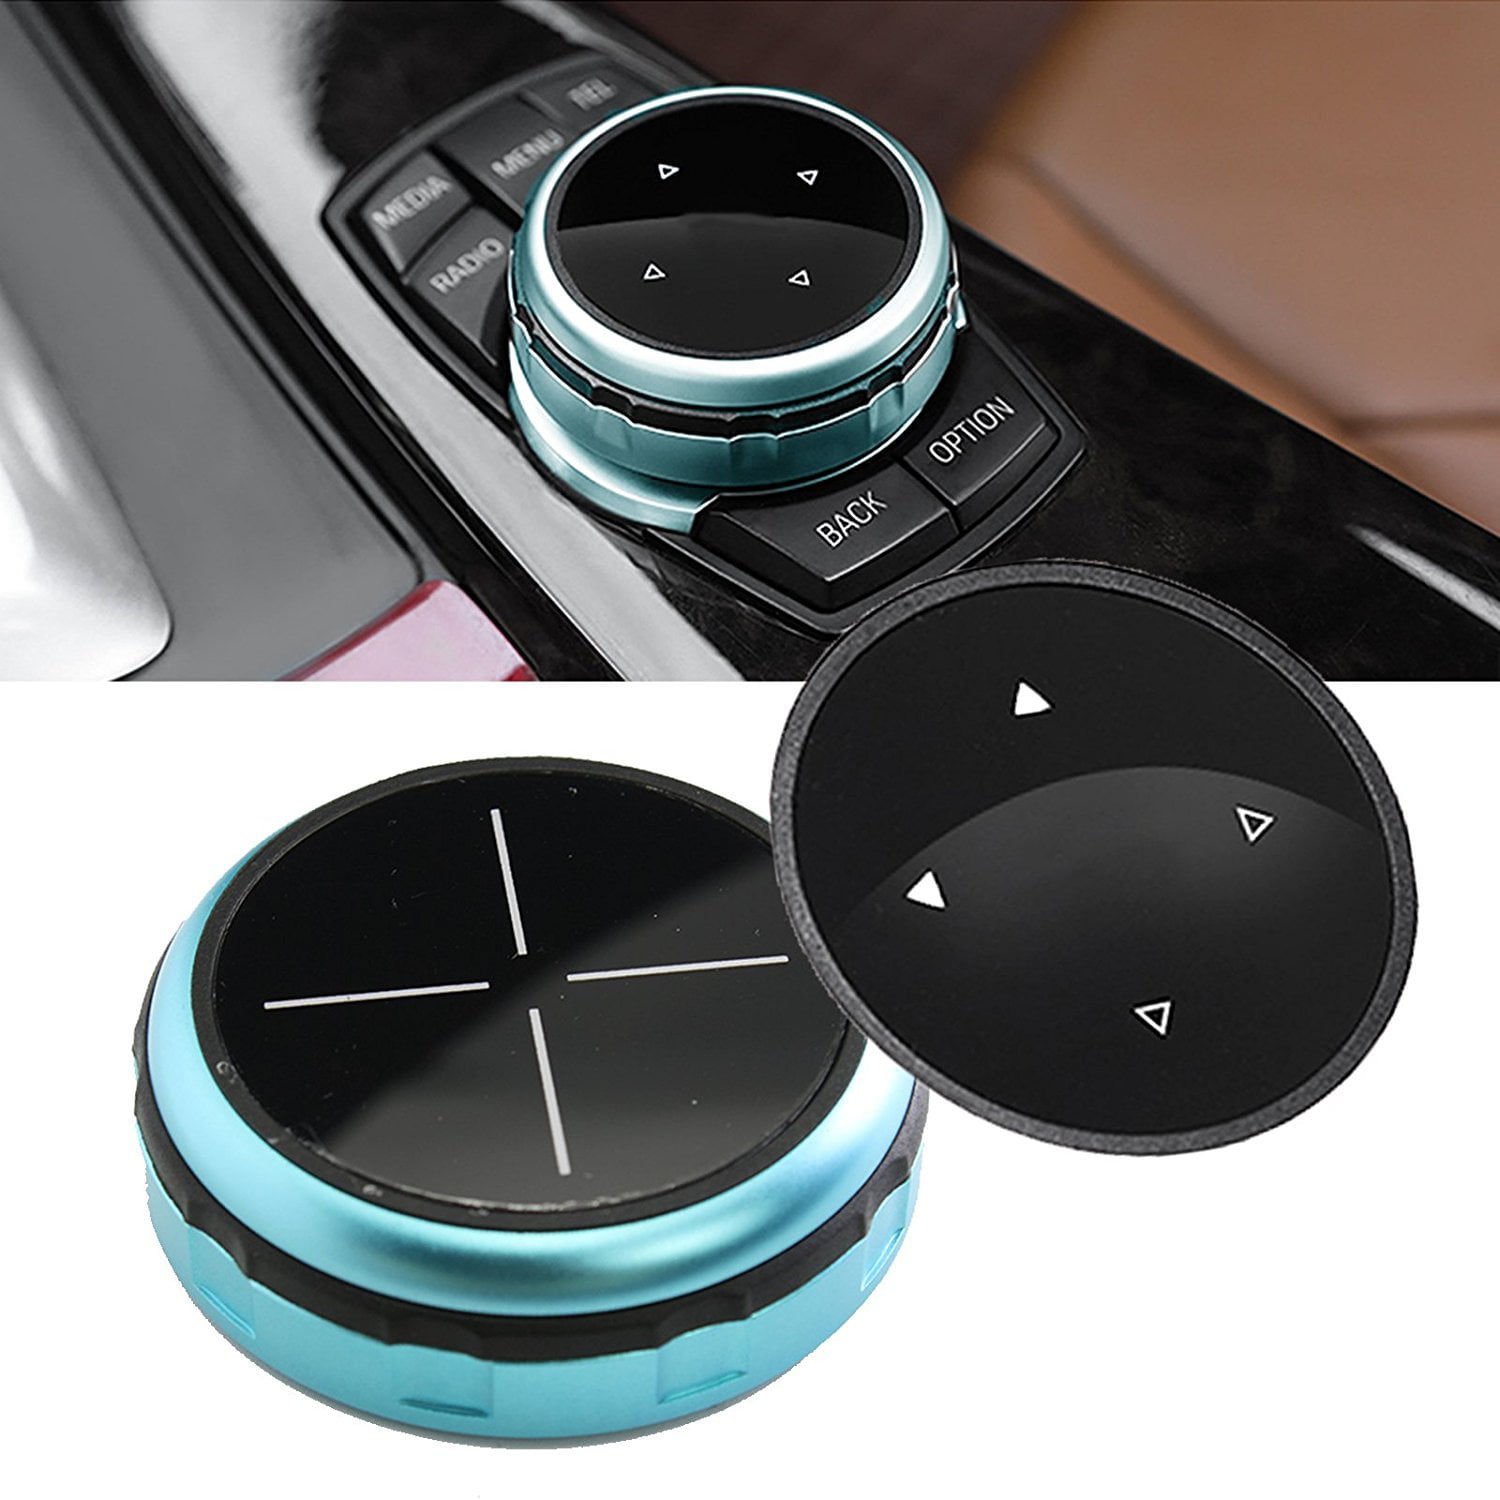 Thor-Ind Aluminum Multimedia Knob Cover Ring Sticker Compatible with BMW 1 2 3 4 5 6 7 Series X3 X4 X5 X6 Center Console iDrive Multimedia Controller Knob Blue 